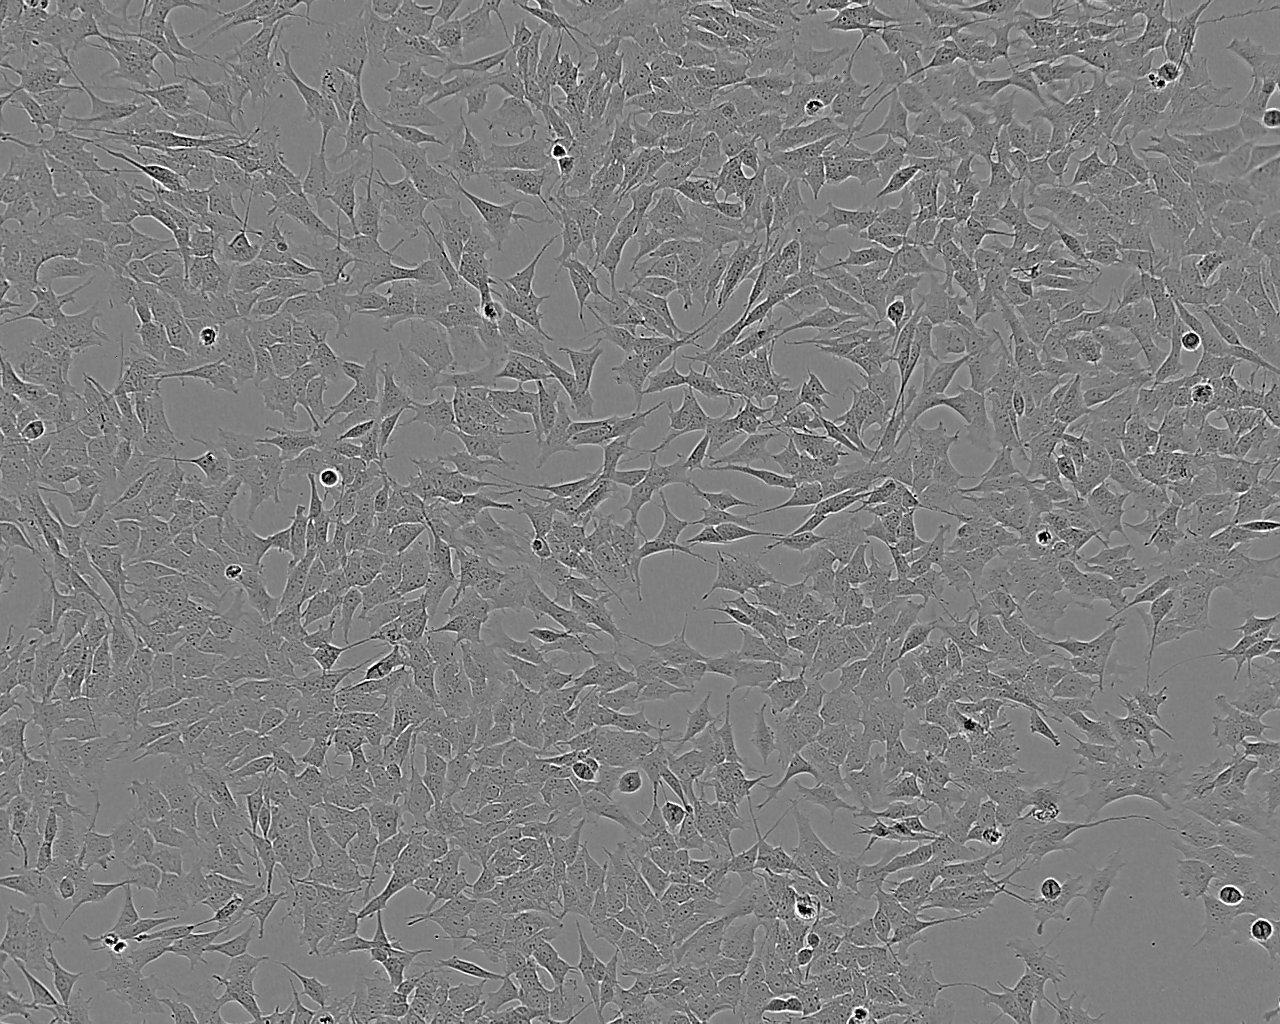 SCaBER epithelioid cells人鳞状膀胱癌细胞系,SCaBER epithelioid cells